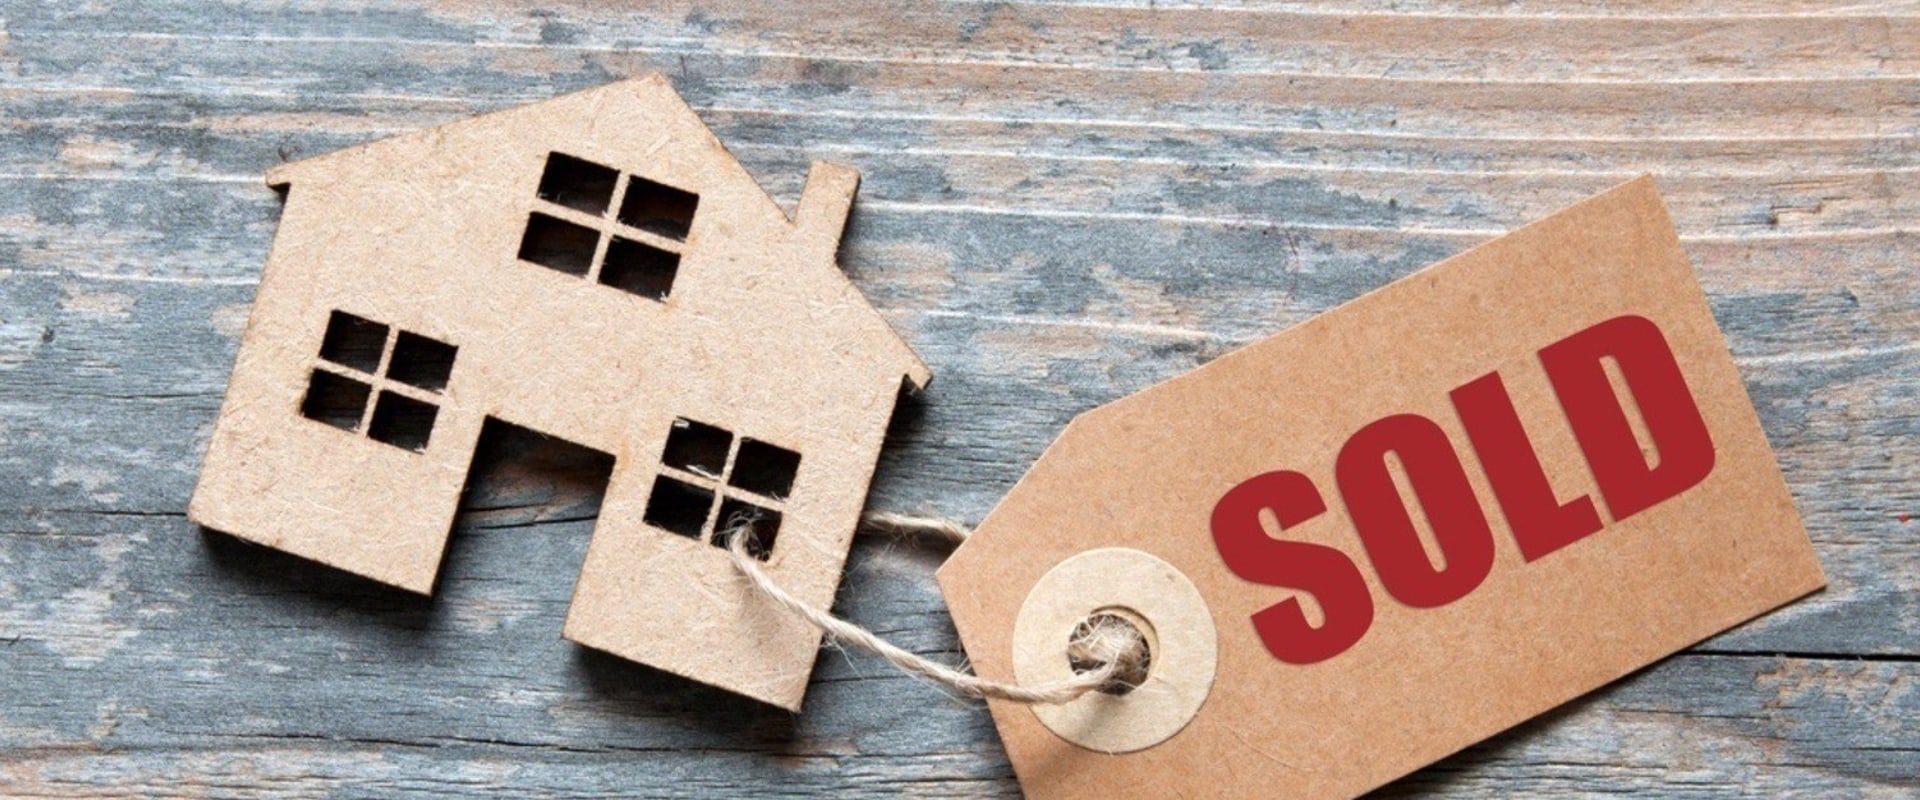 Avoiding Realtor Commissions: How to Sell Your Home Quickly and Easily